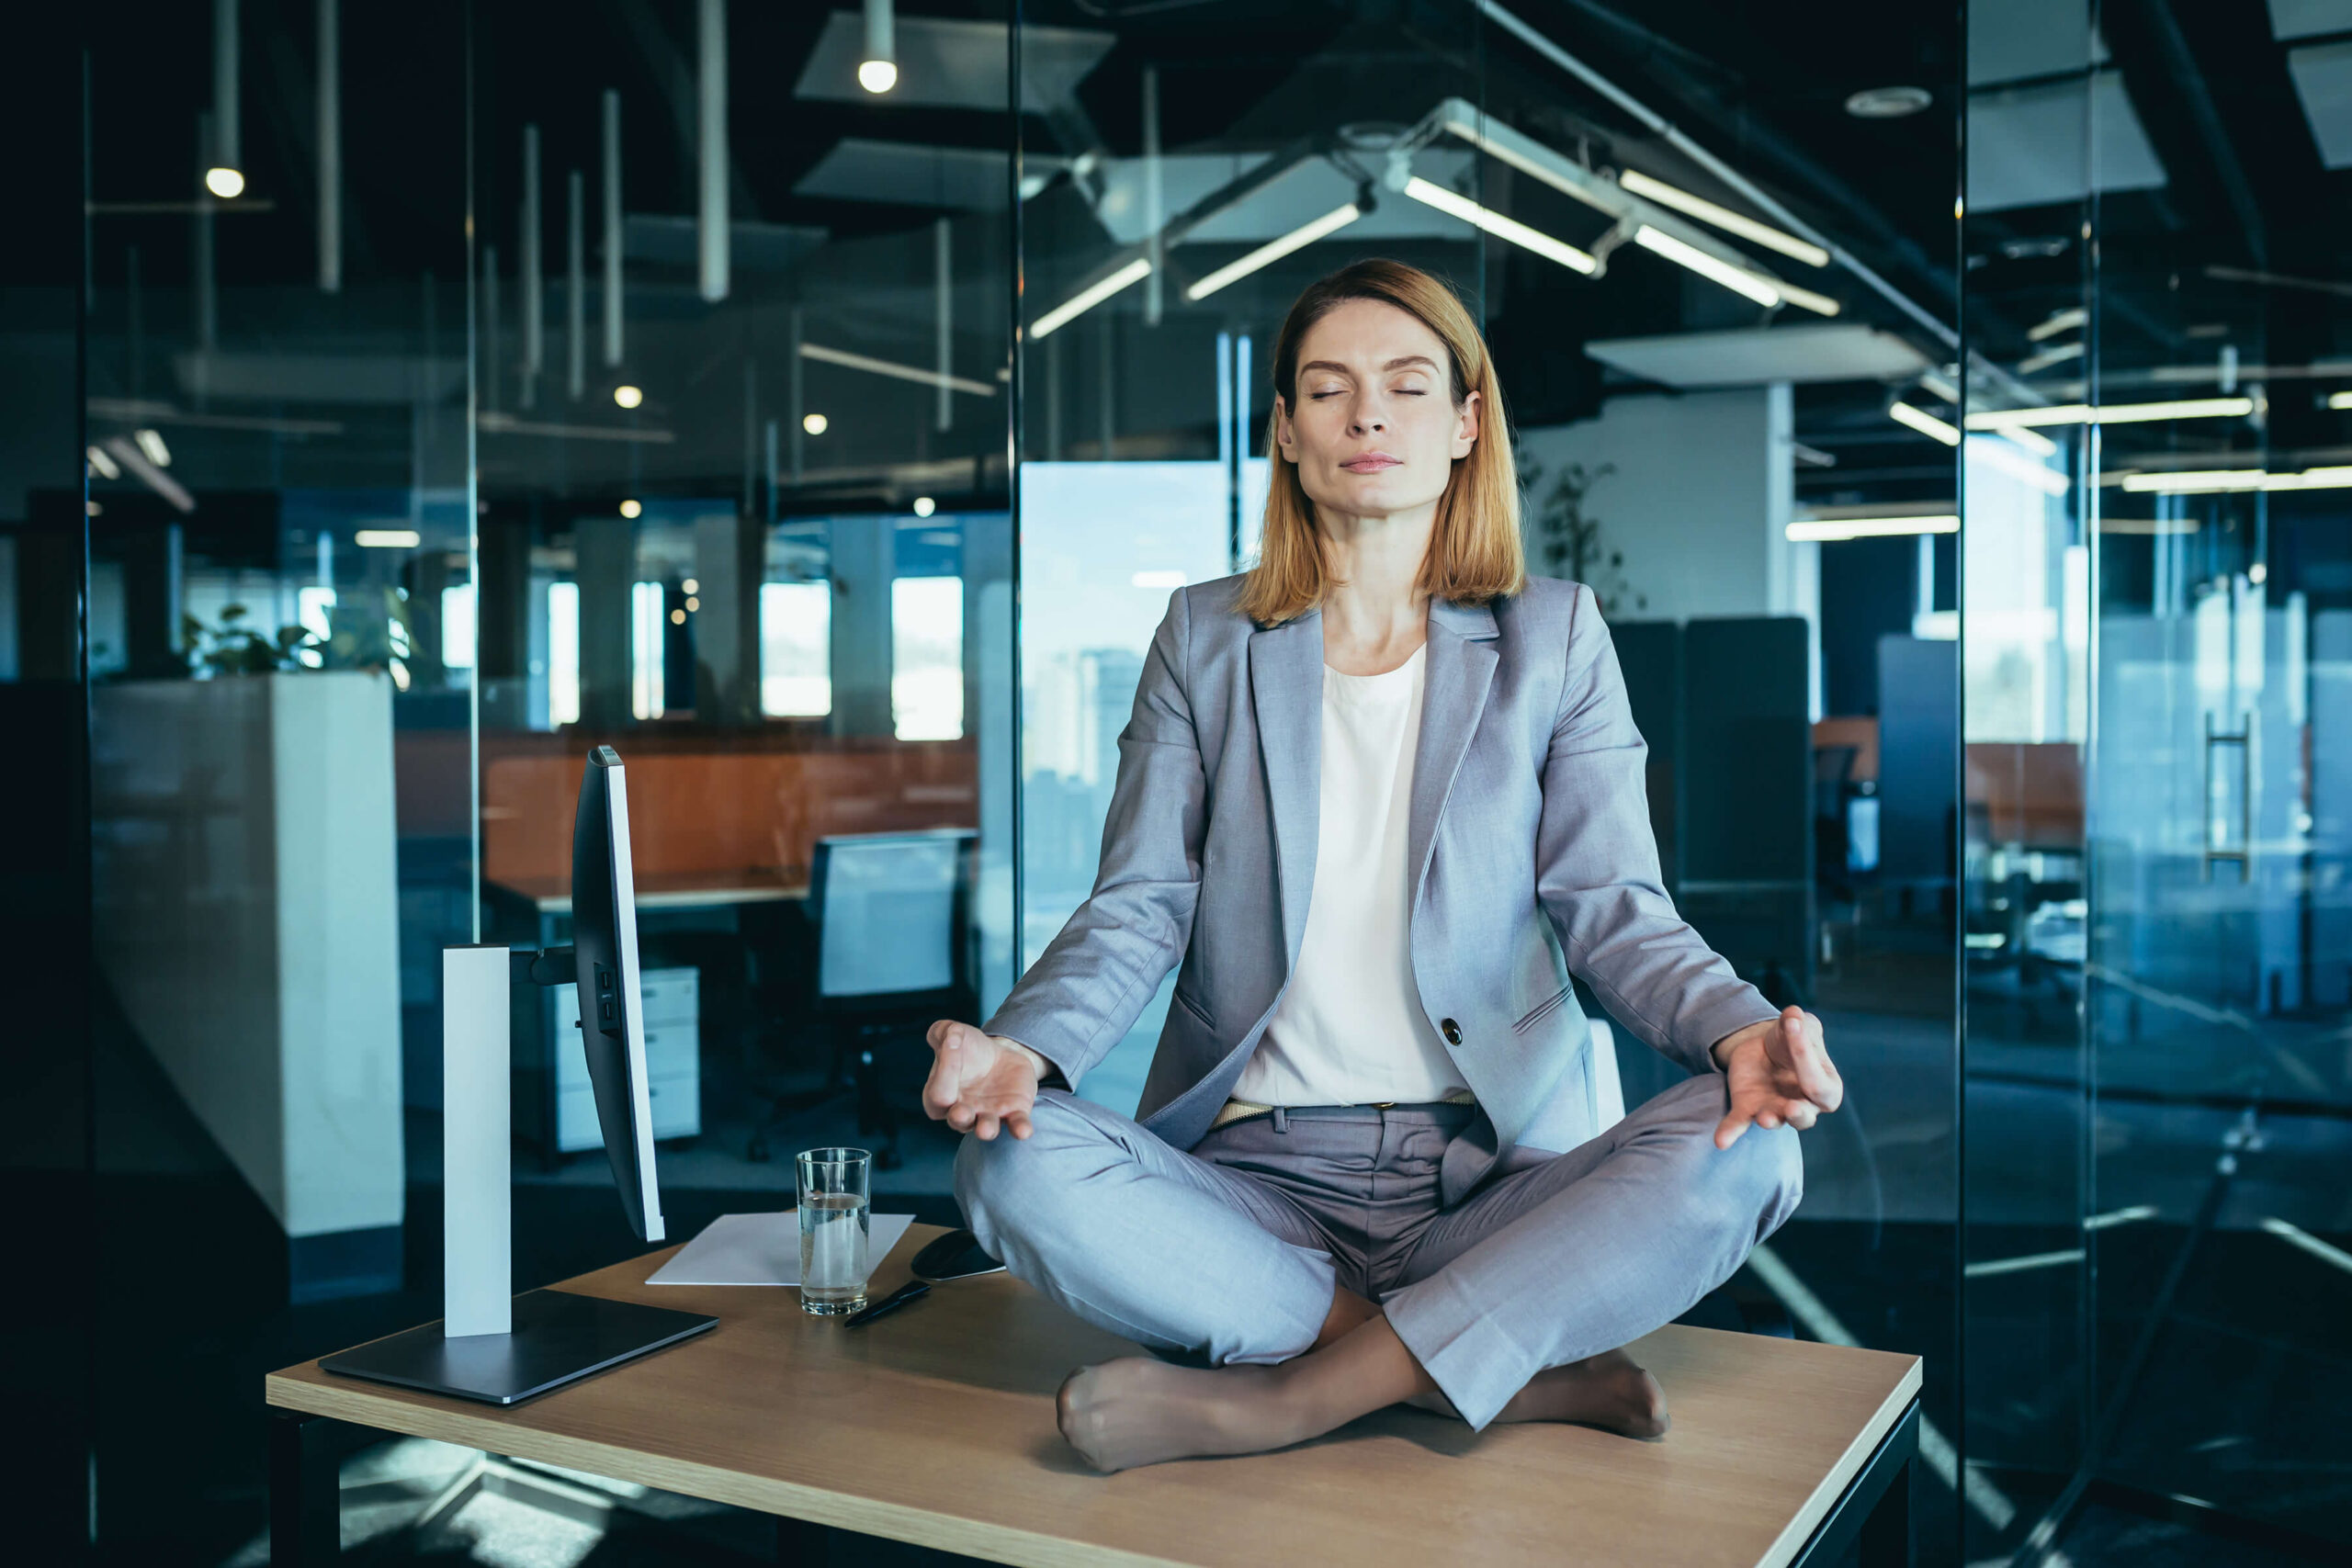 Business woman alone sitting at desk in her office, female employee meditating in lotus position